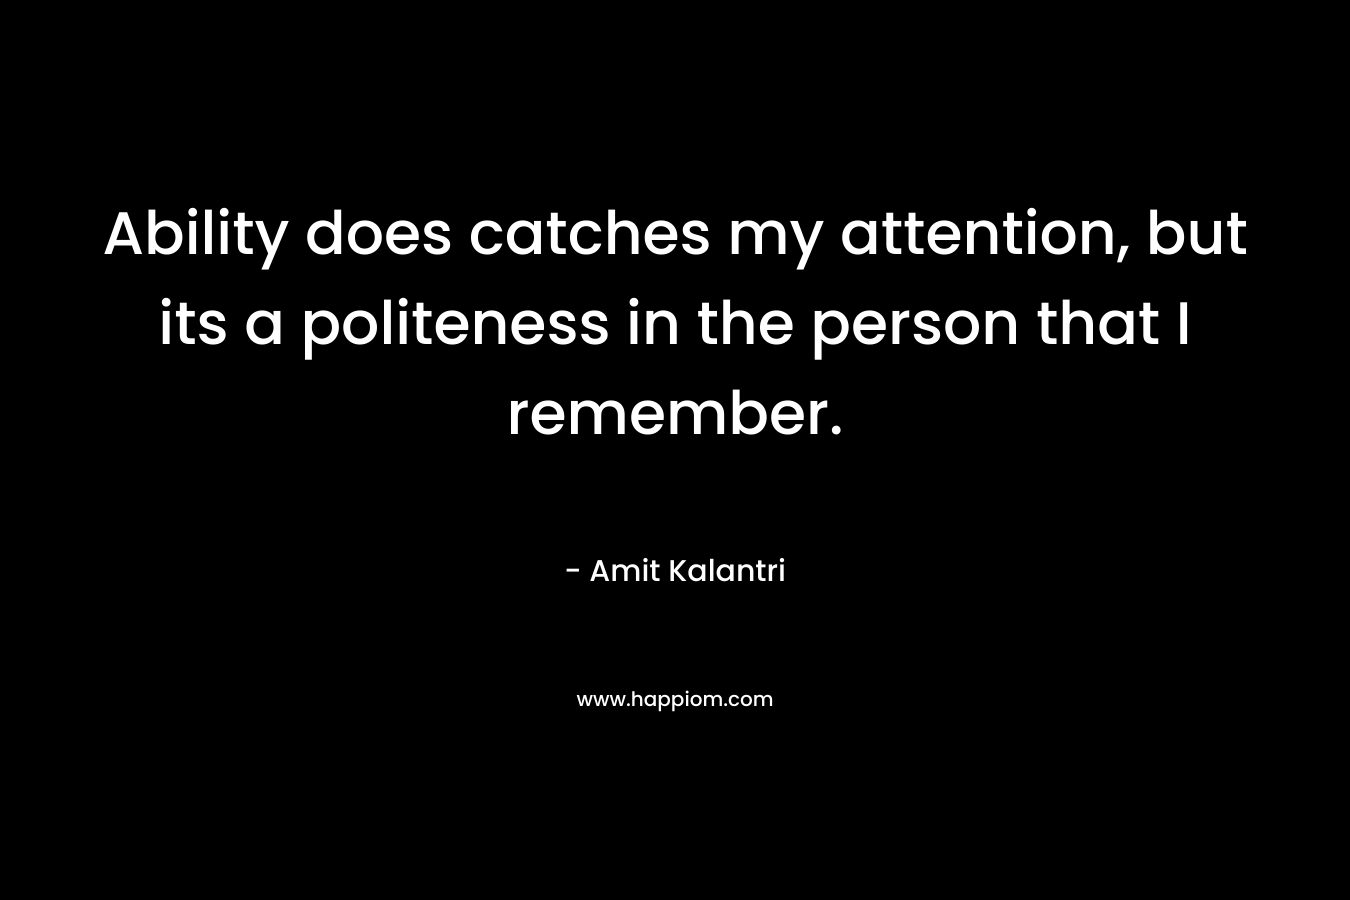 Ability does catches my attention, but its a politeness in the person that I remember.